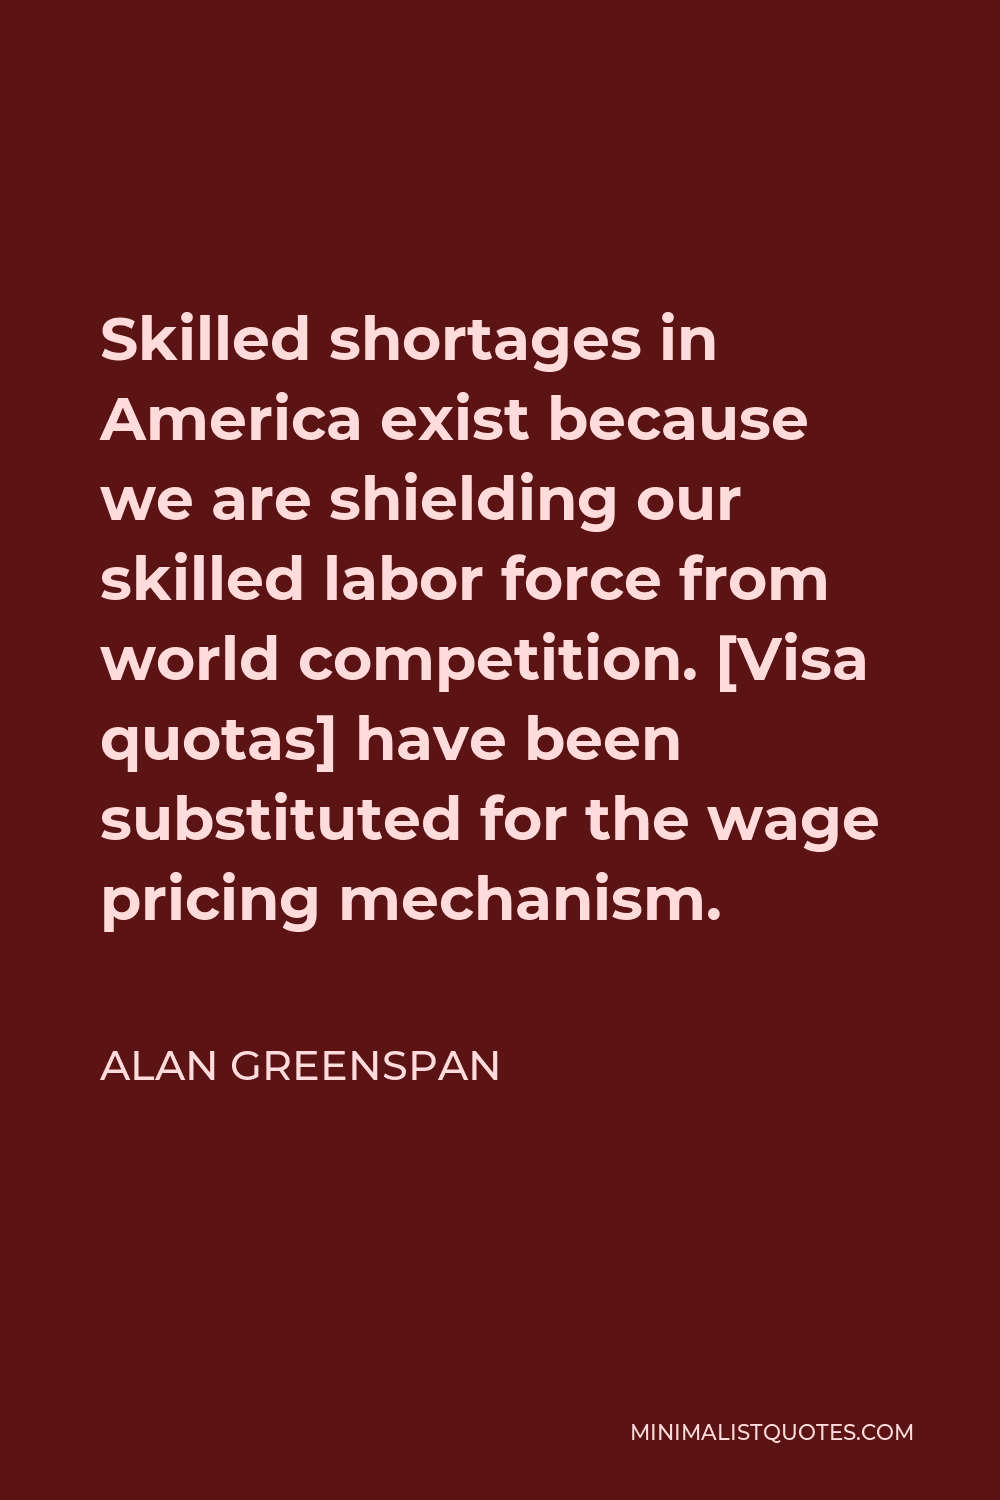 Alan Greenspan Quote - Skilled shortages in America exist because we are shielding our skilled labor force from world competition. [Visa quotas] have been substituted for the wage pricing mechanism.